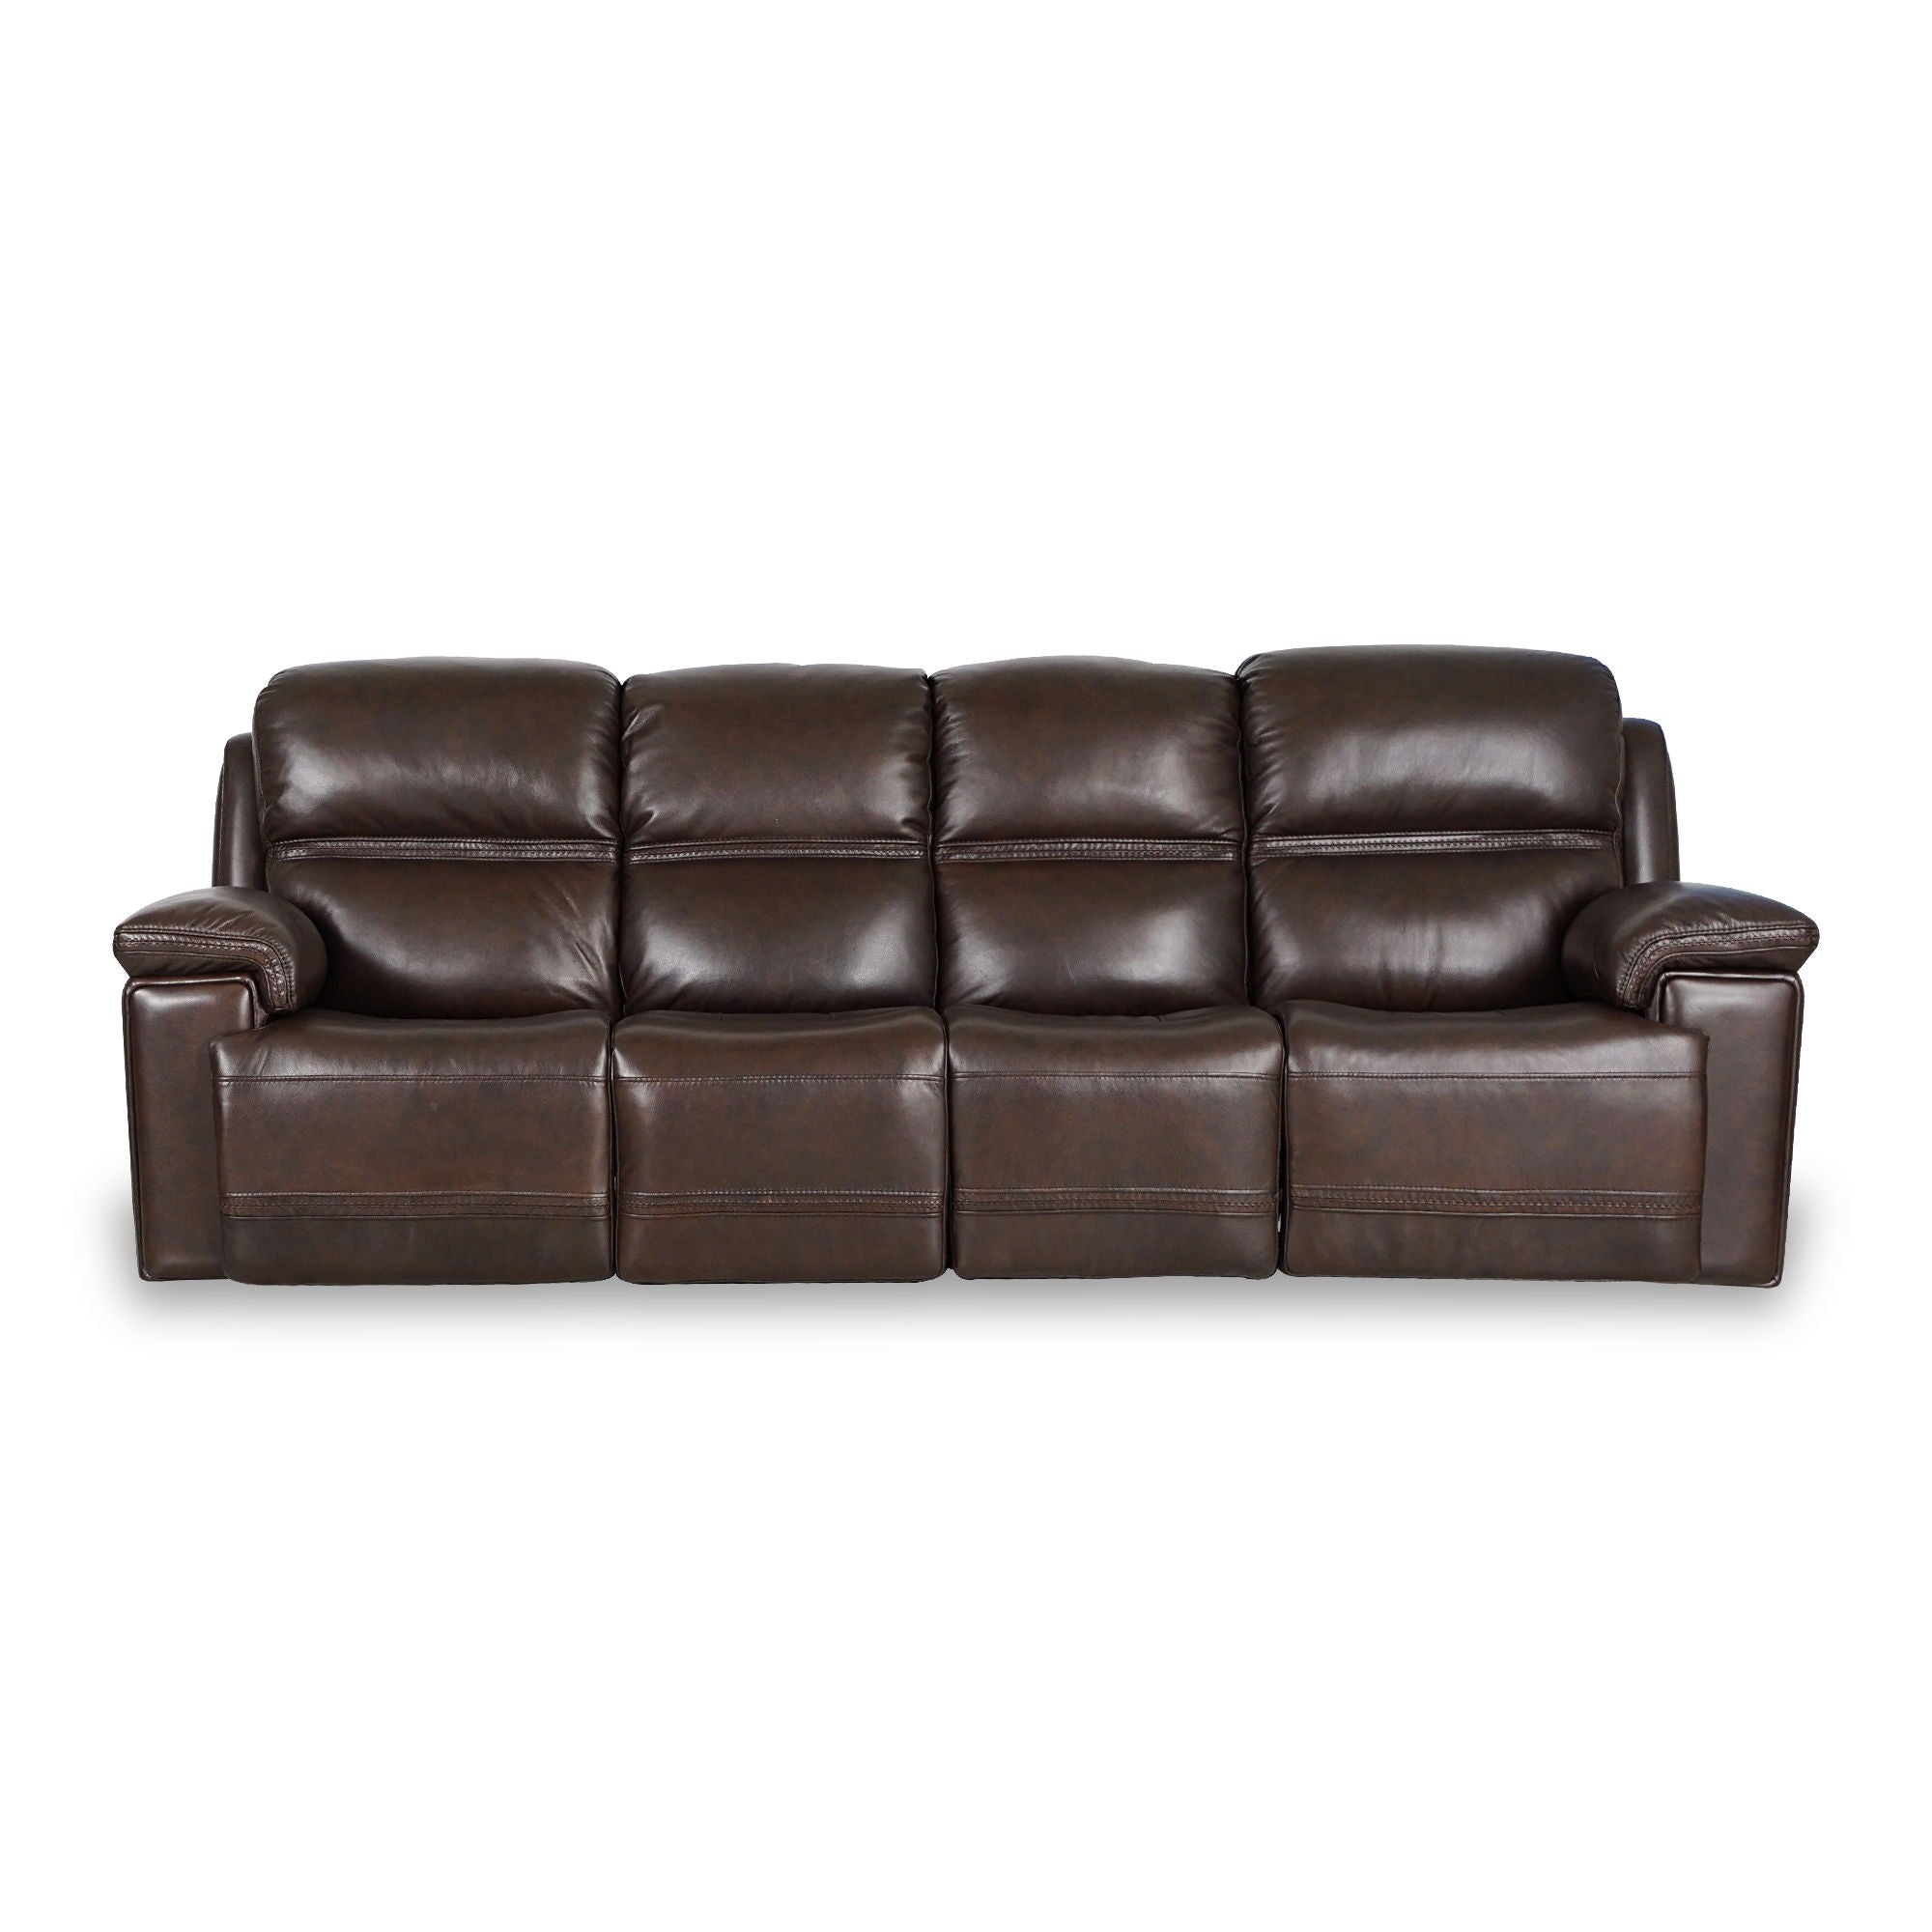 Timo Top Grain Leather Power Reclining Sofa, Adjustable Headrest, Big Size, Cross Stitching